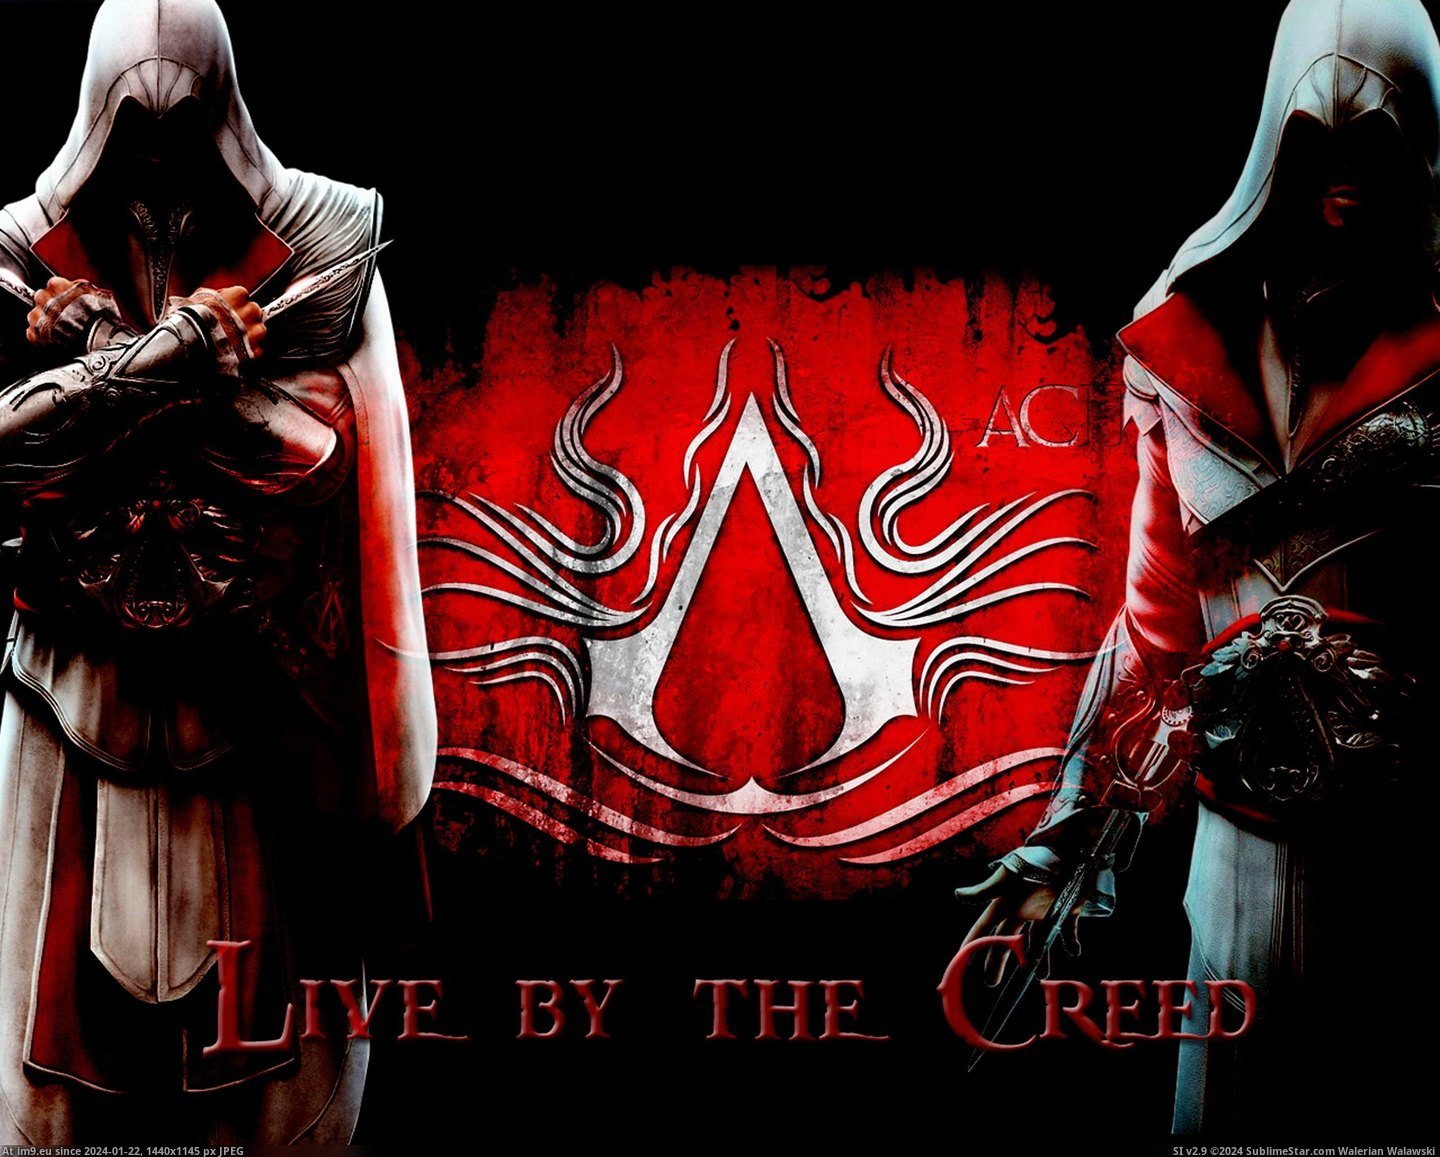 #Game #Creed #Assassin #Video Video Game Assassin'S Creed 195657 Pic. (Изображение из альбом Games Wallpapers))